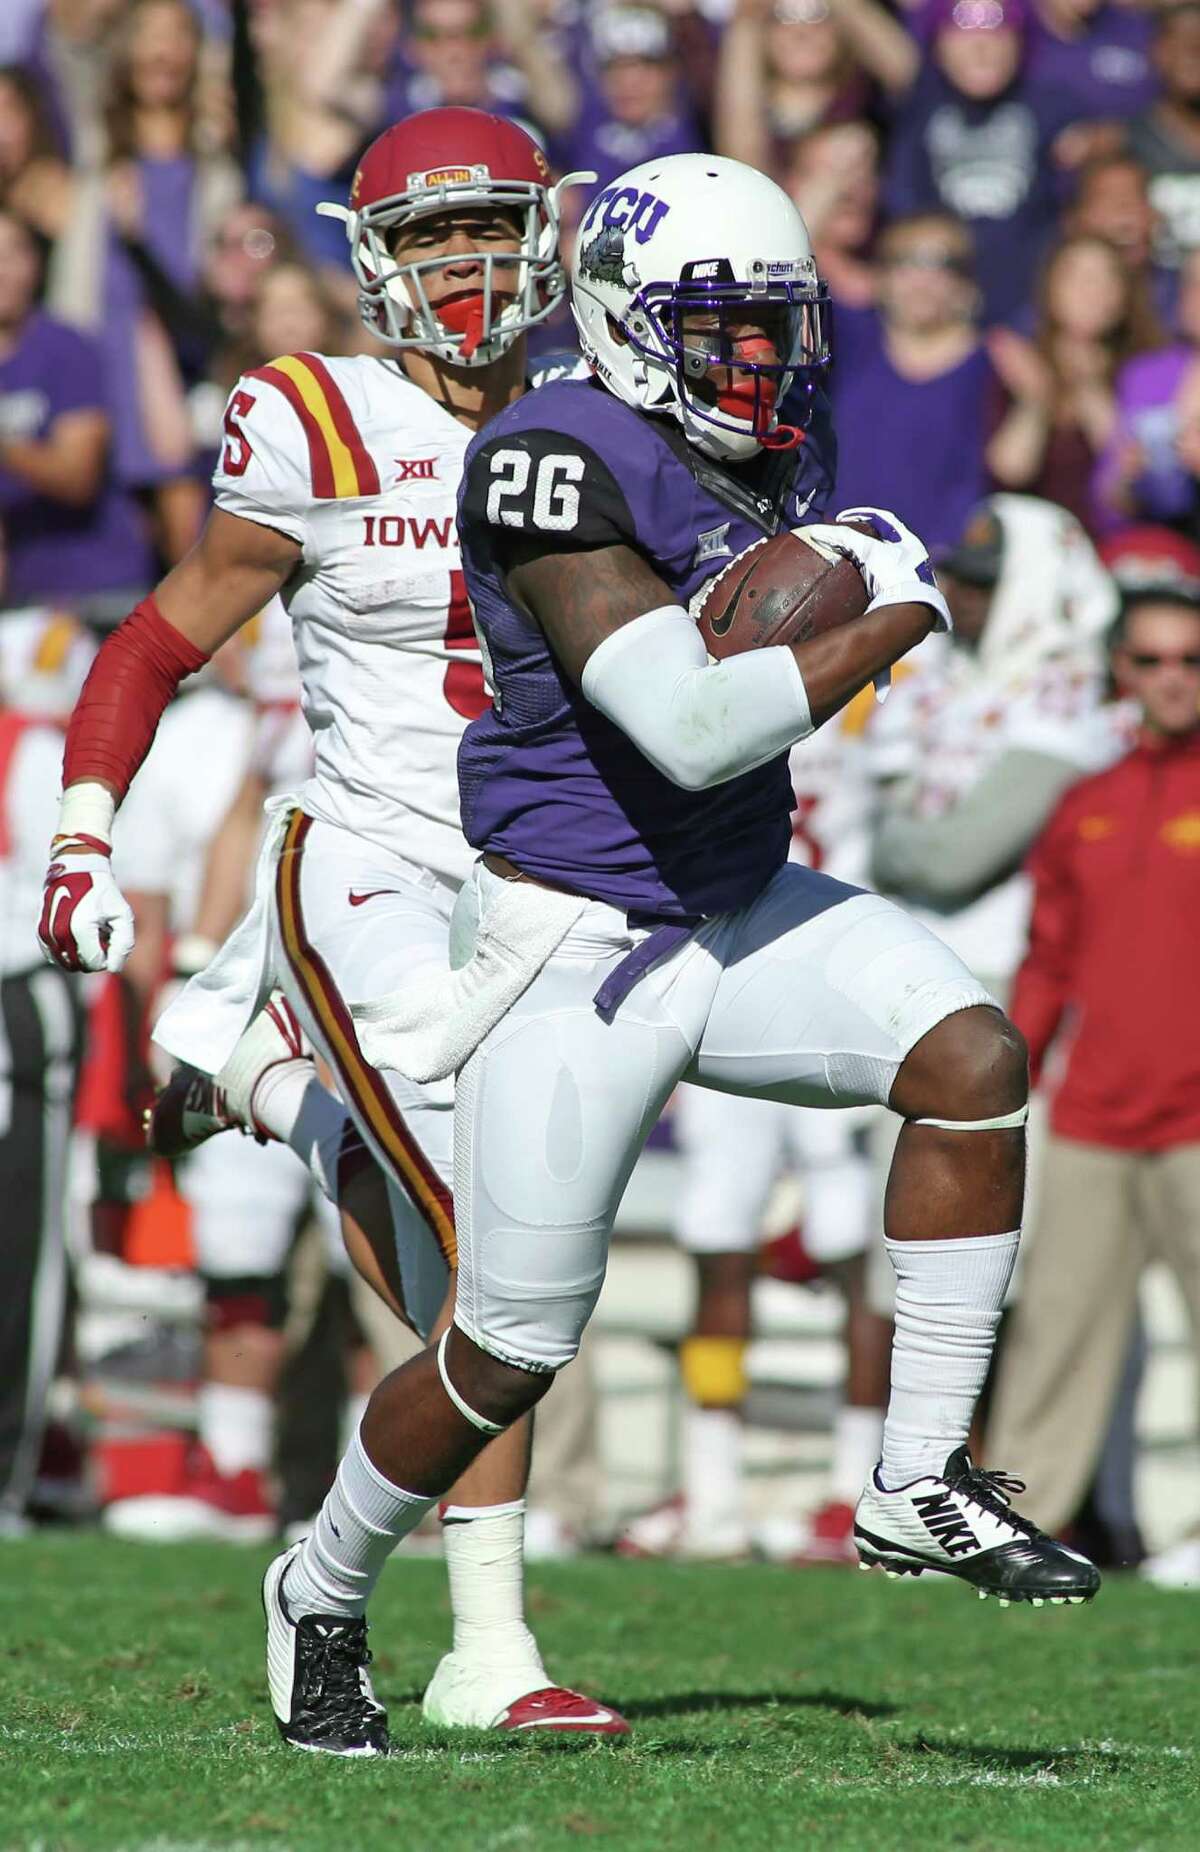 TCU safety Derrick Kindred (26) returns an interception for a touchdown during the third quarter of an NCAA college football game against Iowa State at Amon G. Carter Stadium, Saturday, Dec. 6, 2014, in Fort Worth.